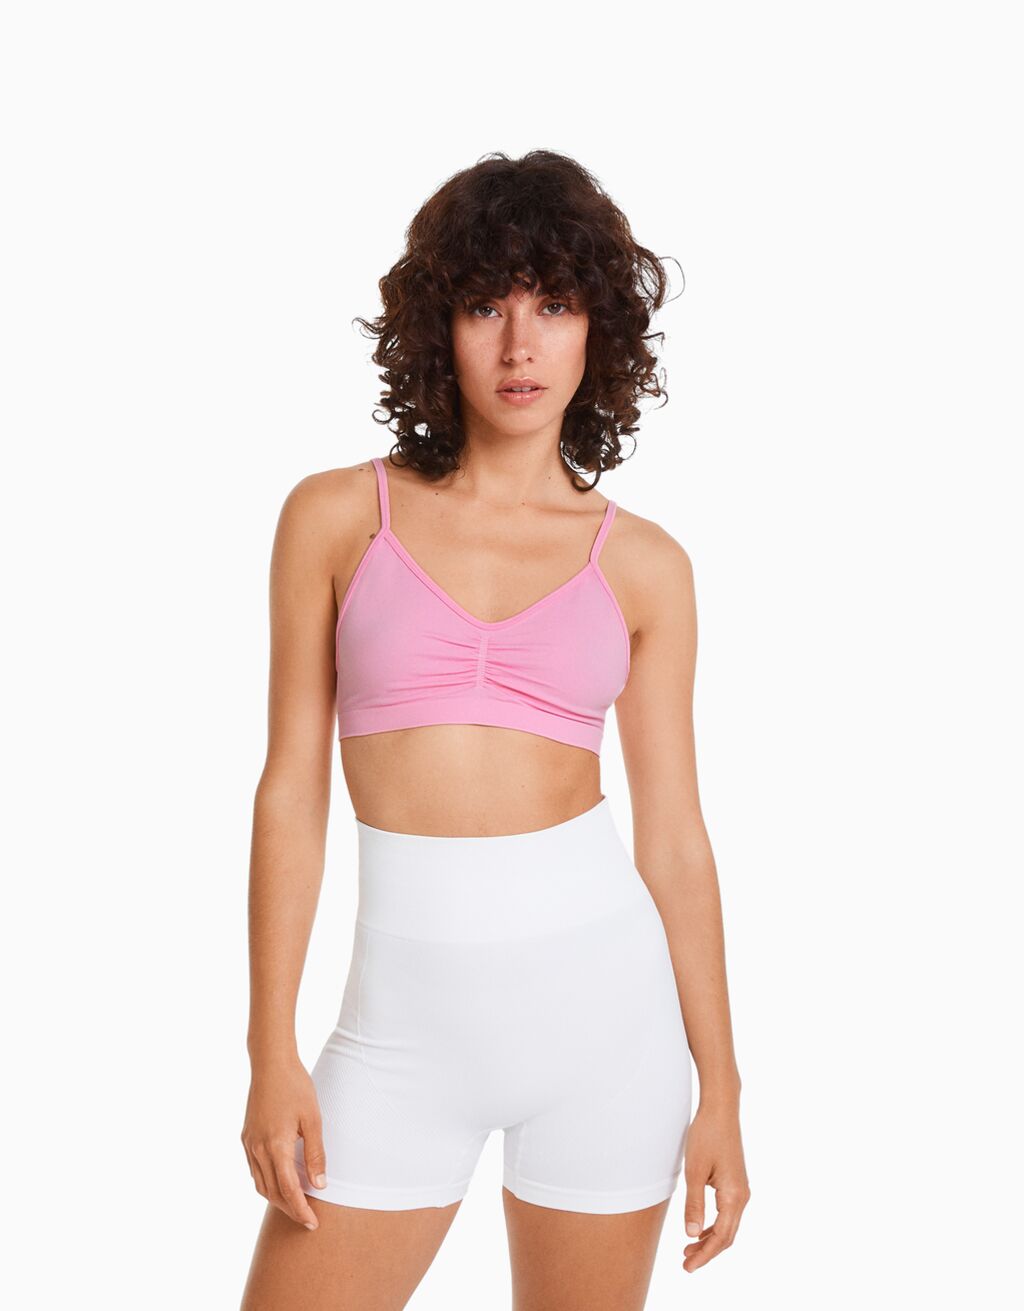 Gathered seamless strappy top - T-shirts and tops - BSK Teen